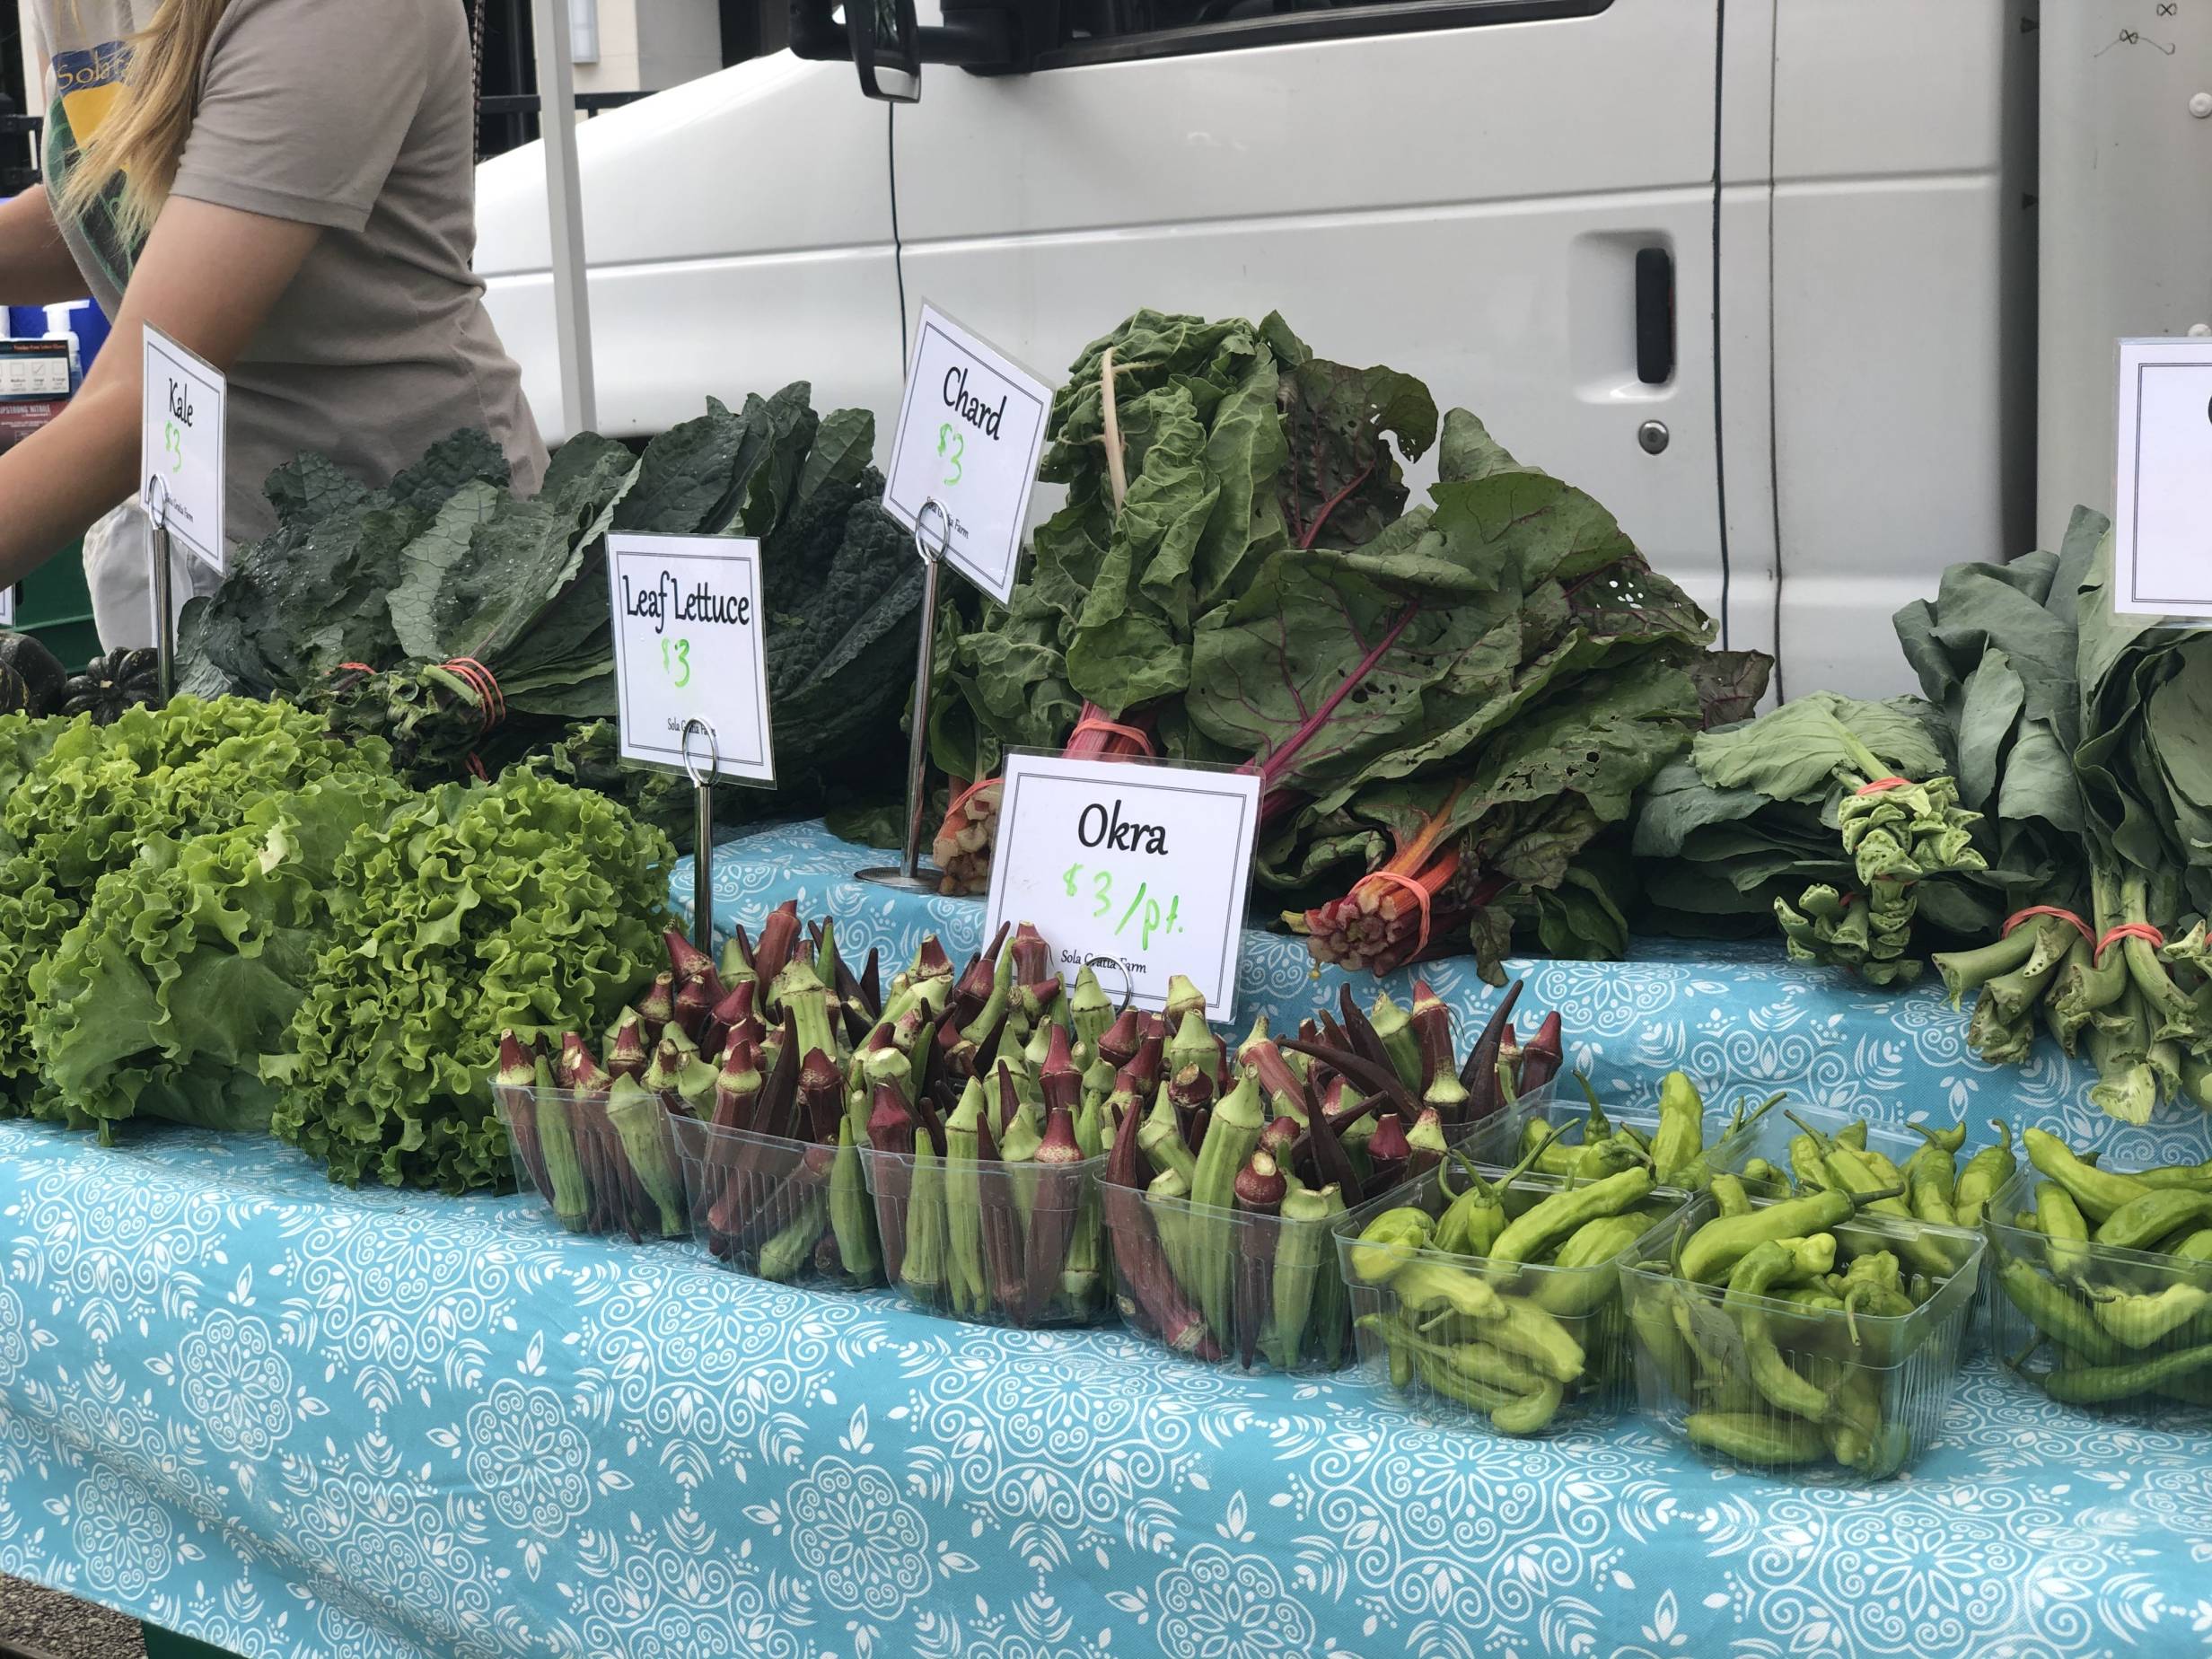 Greens and okra are for sale on a blue tableclothed table at the Champaign Farmers Market. Photo by Alyssa Buckley.